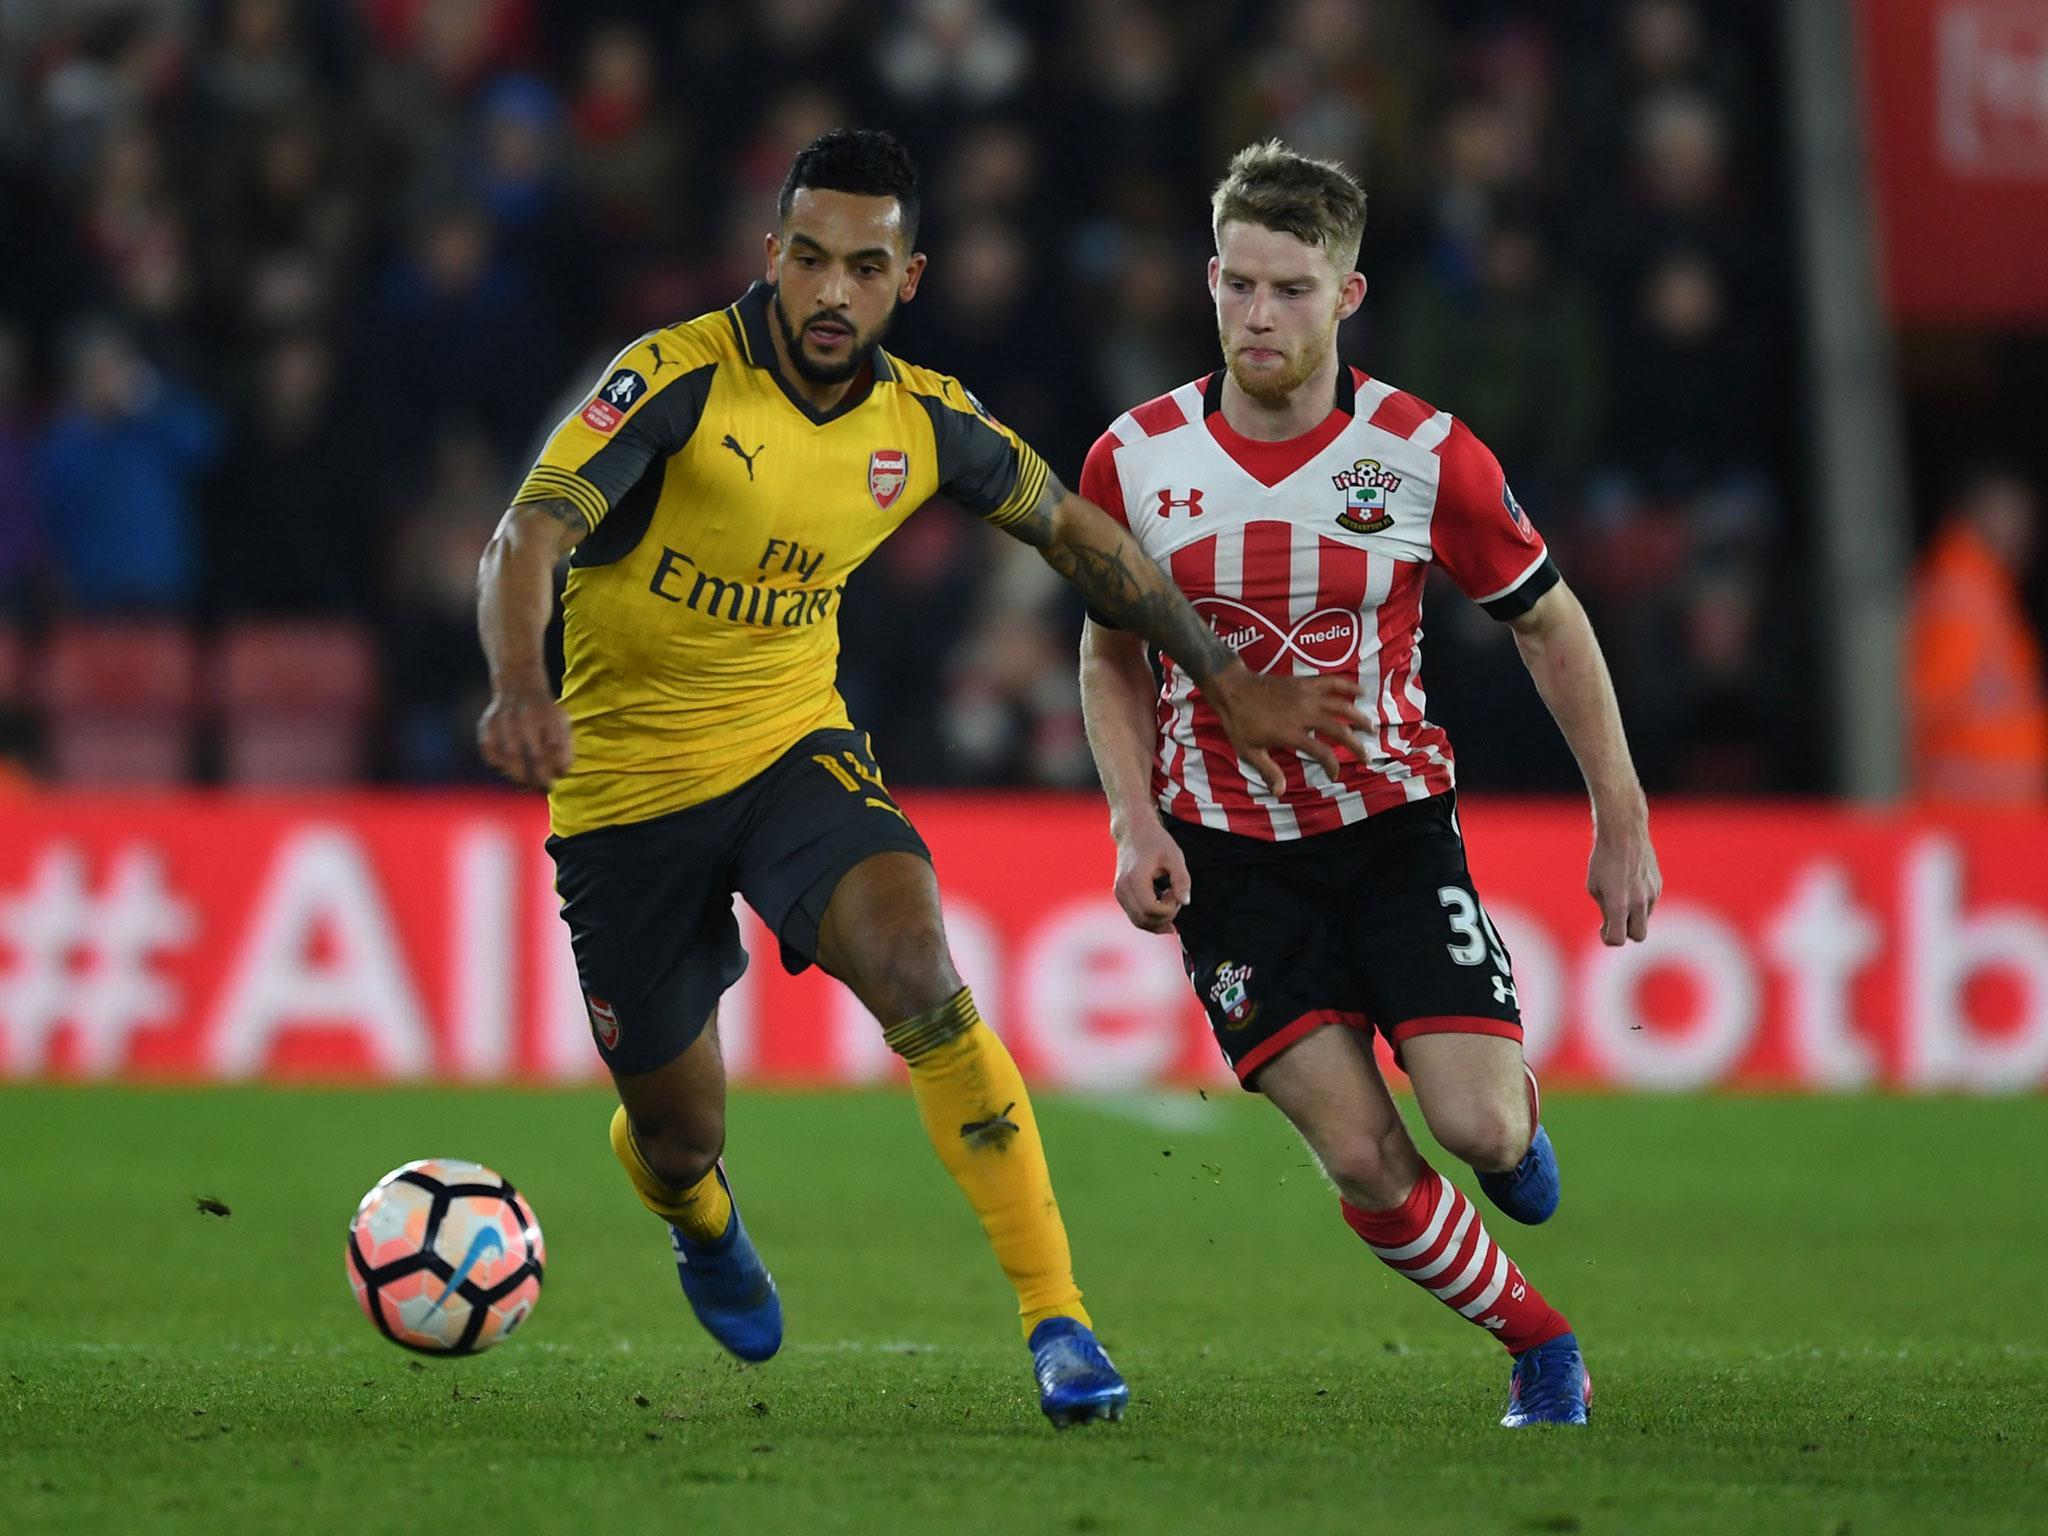 Arsenal face Southampton at St Mary's on Wednesday evening